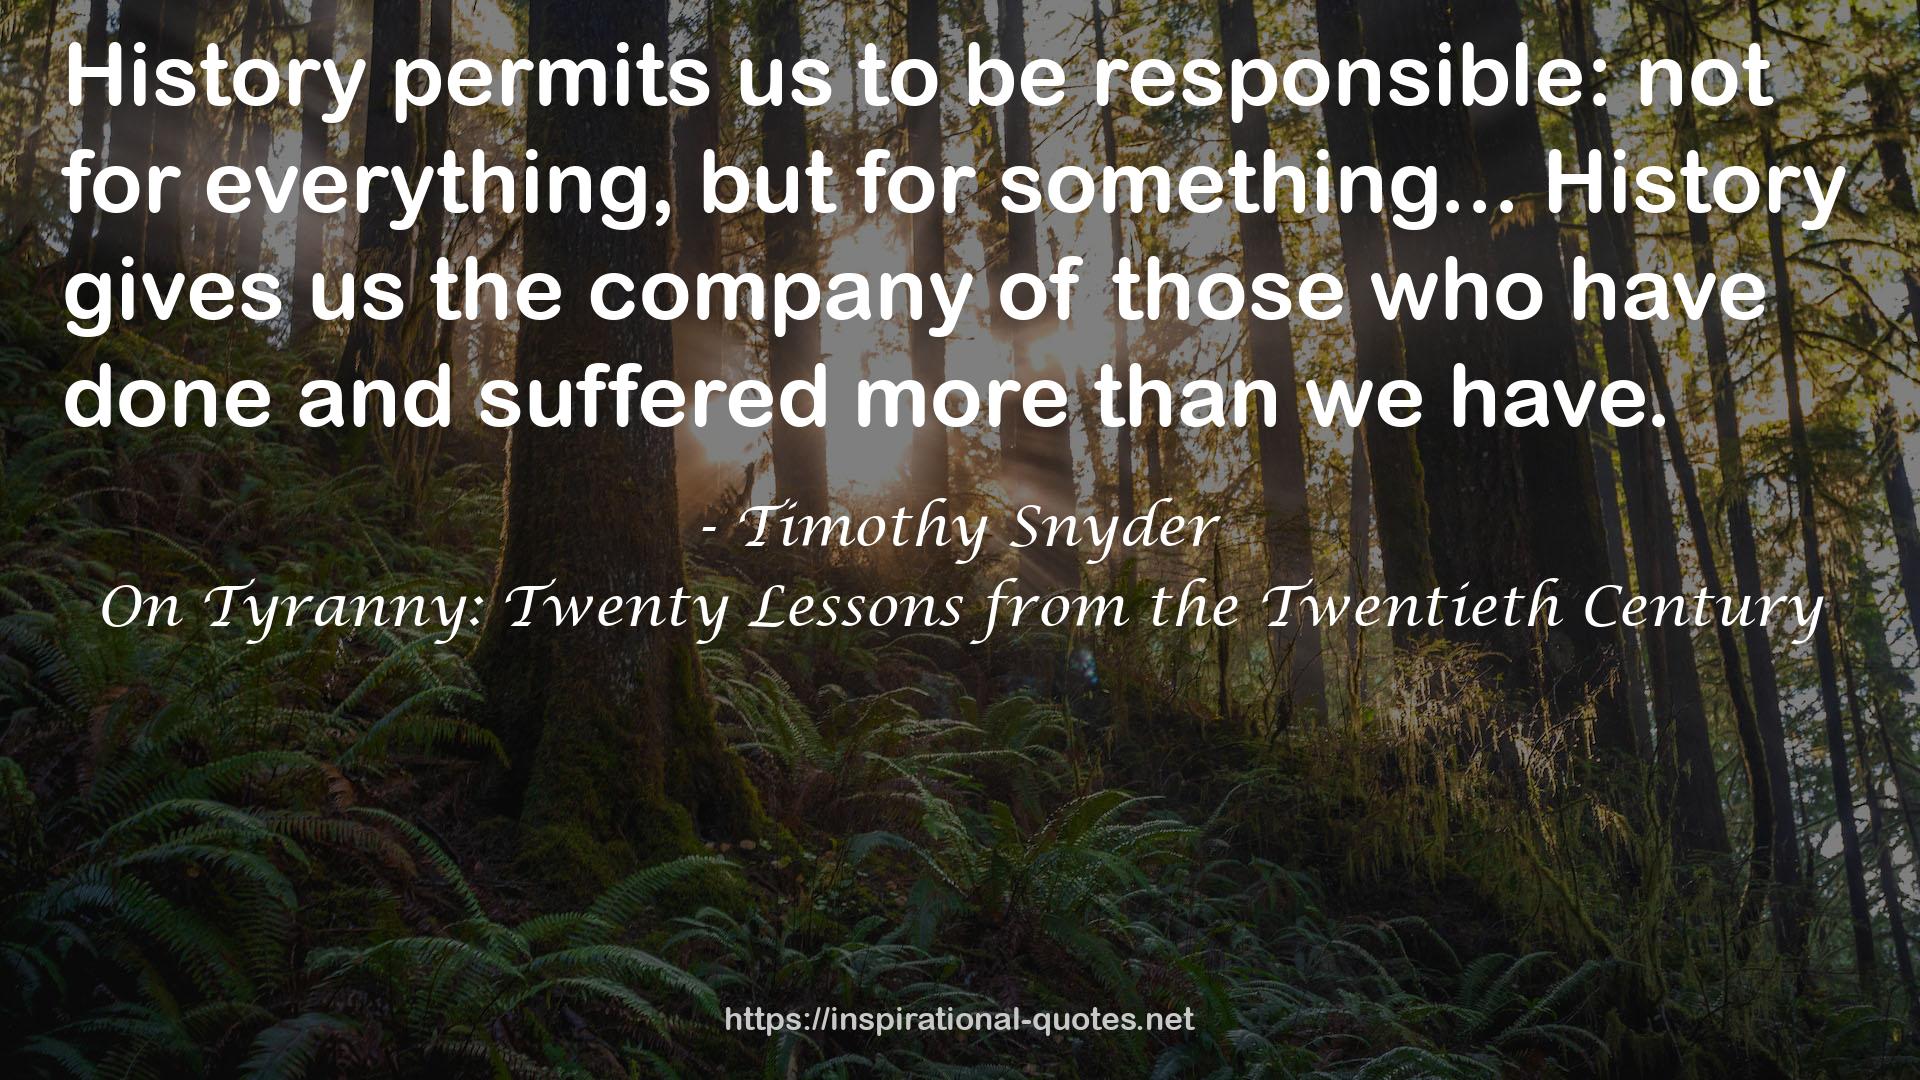 Timothy Snyder QUOTES